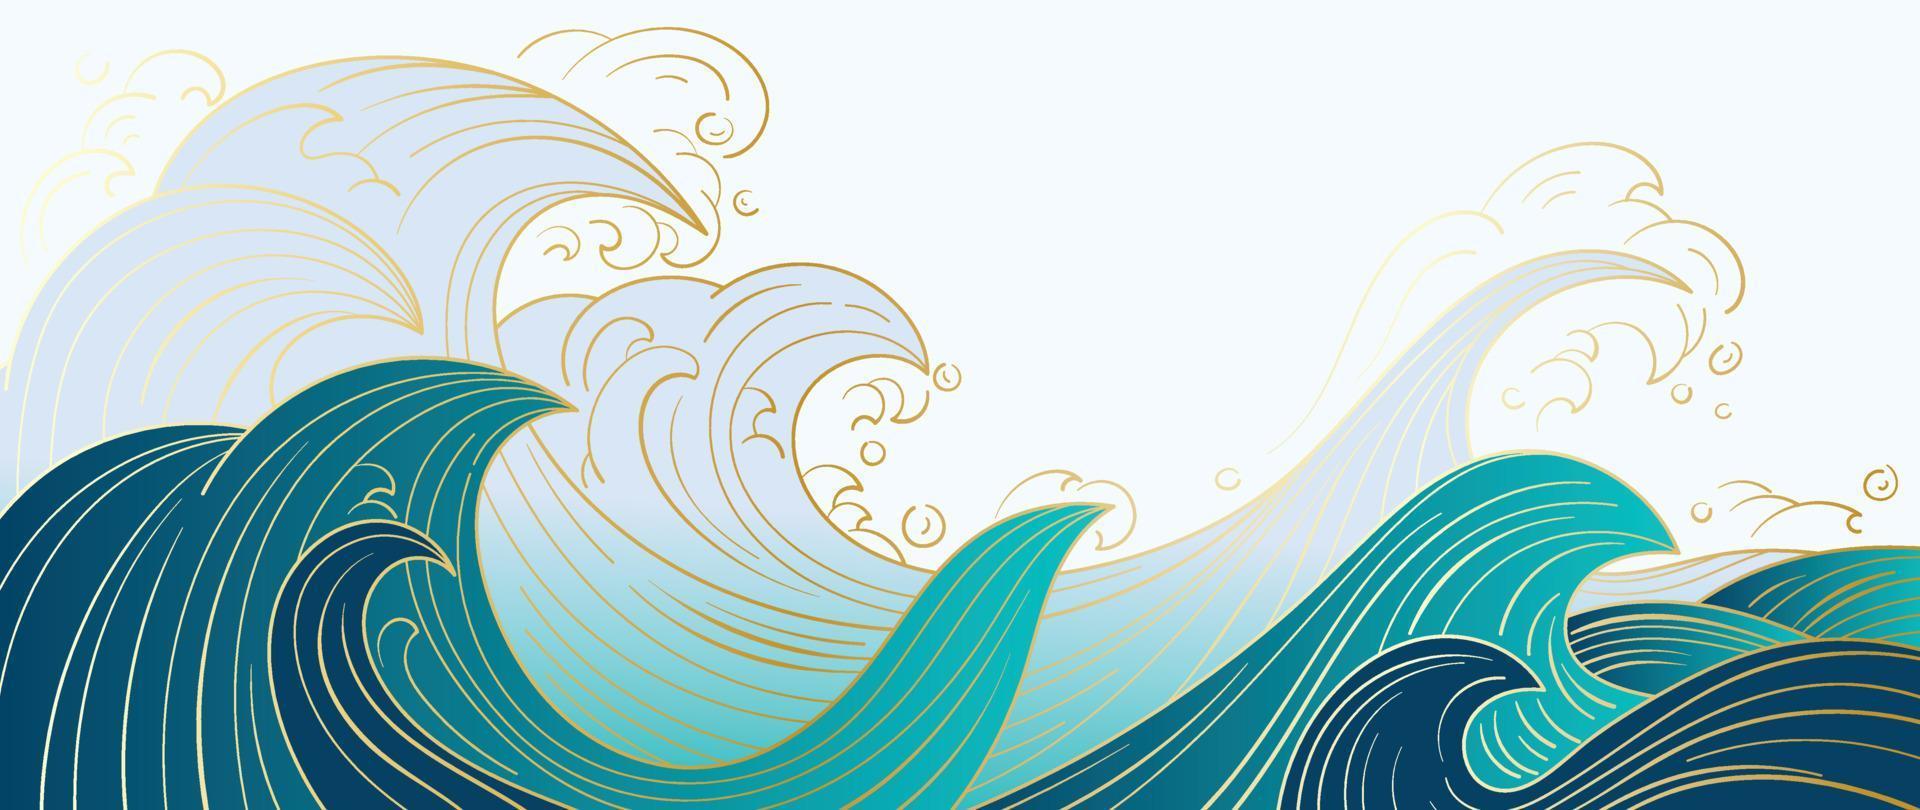 Traditional Japanese wave pattern vector. Luxury hand drawn oriental ocean wave gold line art pattern background. Art design illustration for print, fabric, poster, home decoration and wallpaper. vector